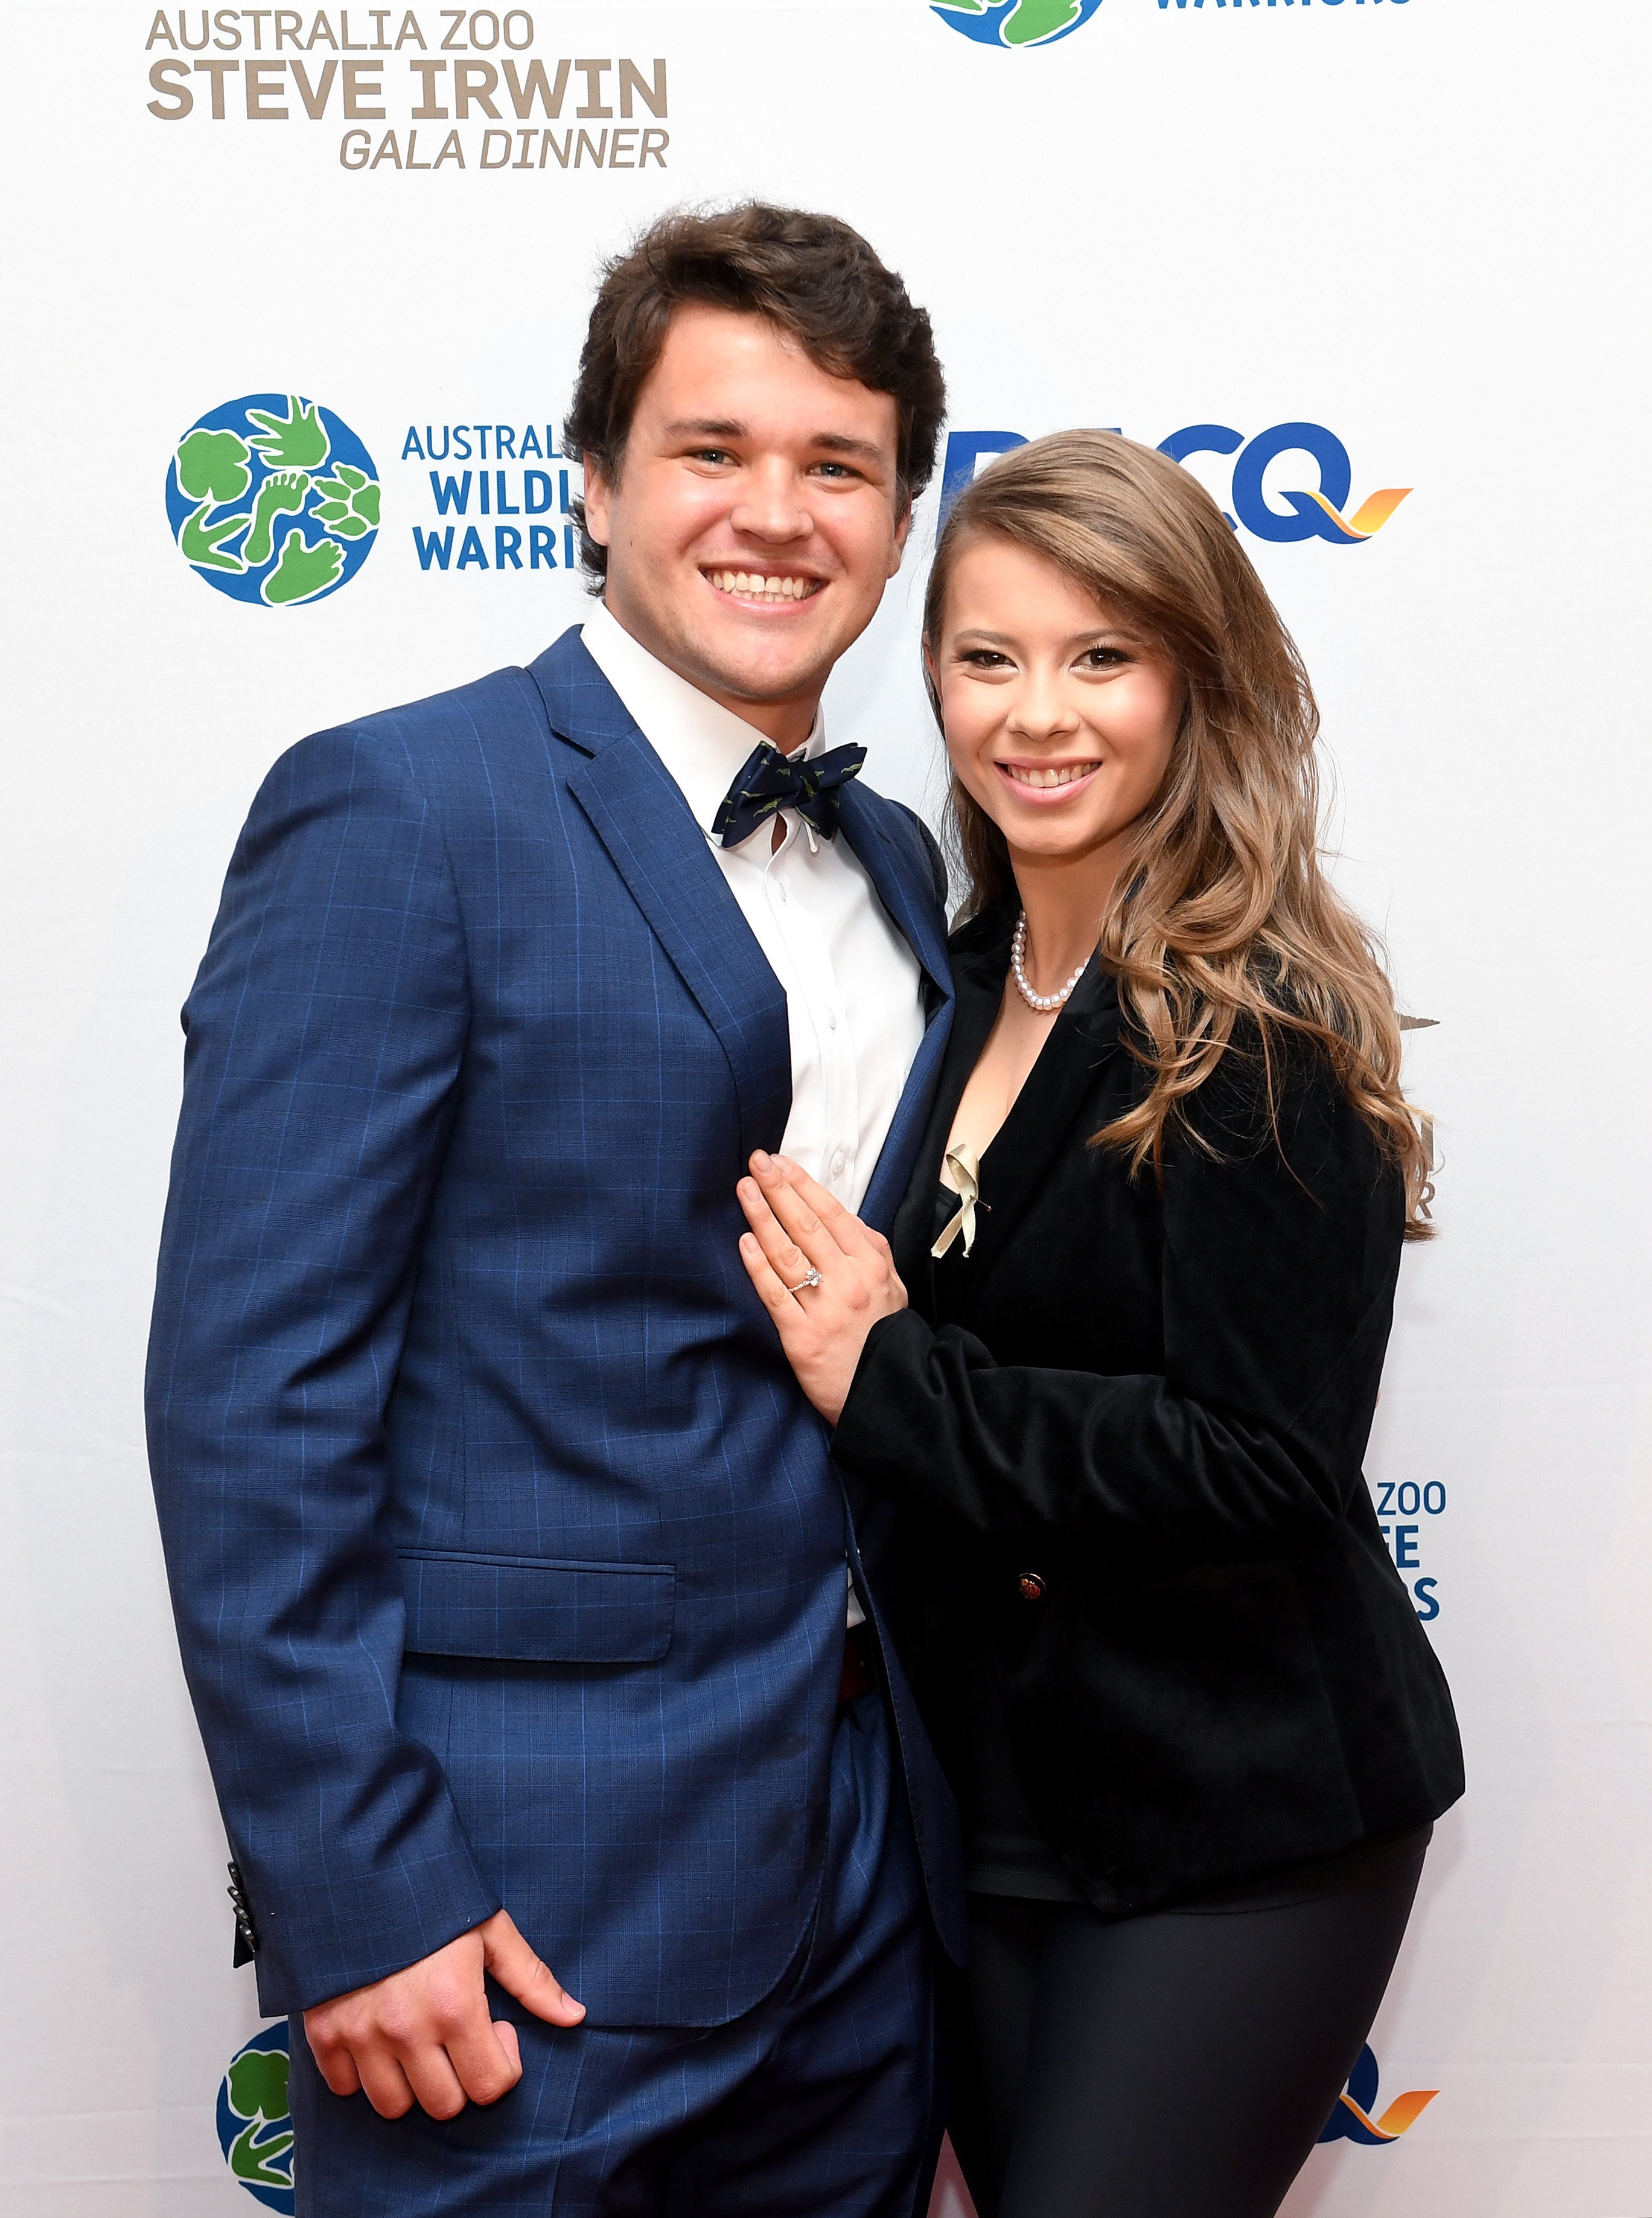 Bindi Irwin poses for a photo with fiance Chandler Powell at the annual Steve Irwin Gala Dinner at Brisbane Convention & Exhibition Centre on November 09, 2019 in Brisbane, Australia | Photo: Getty Images